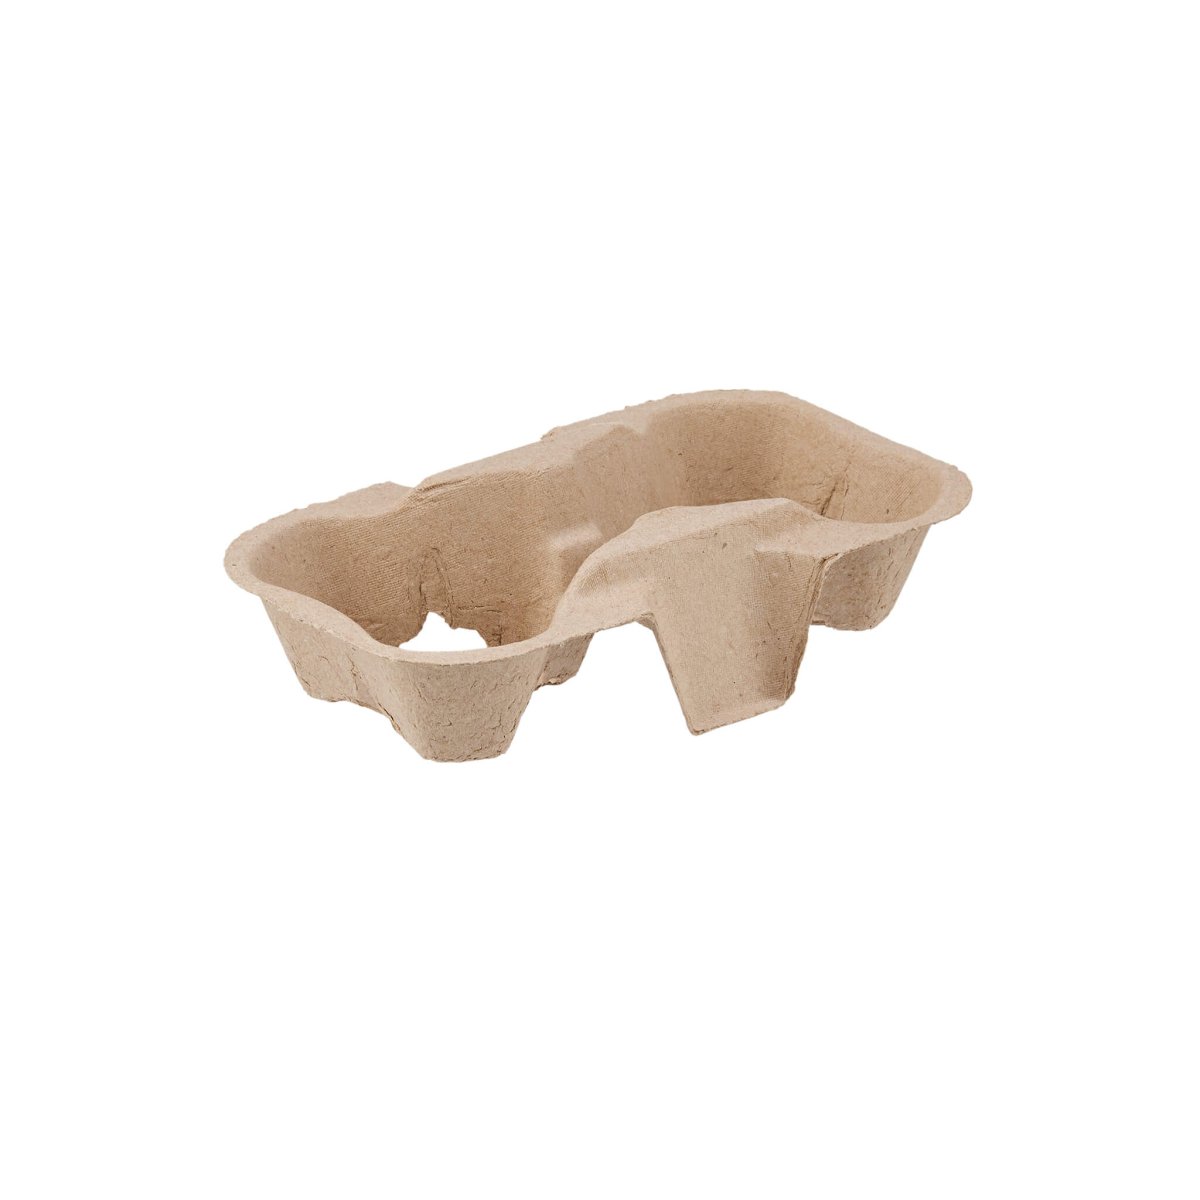 PAPER CORRUGATED 2 - CUP HOLDER 600 Pieces - hotpackwebstore.com - Cup Carriers